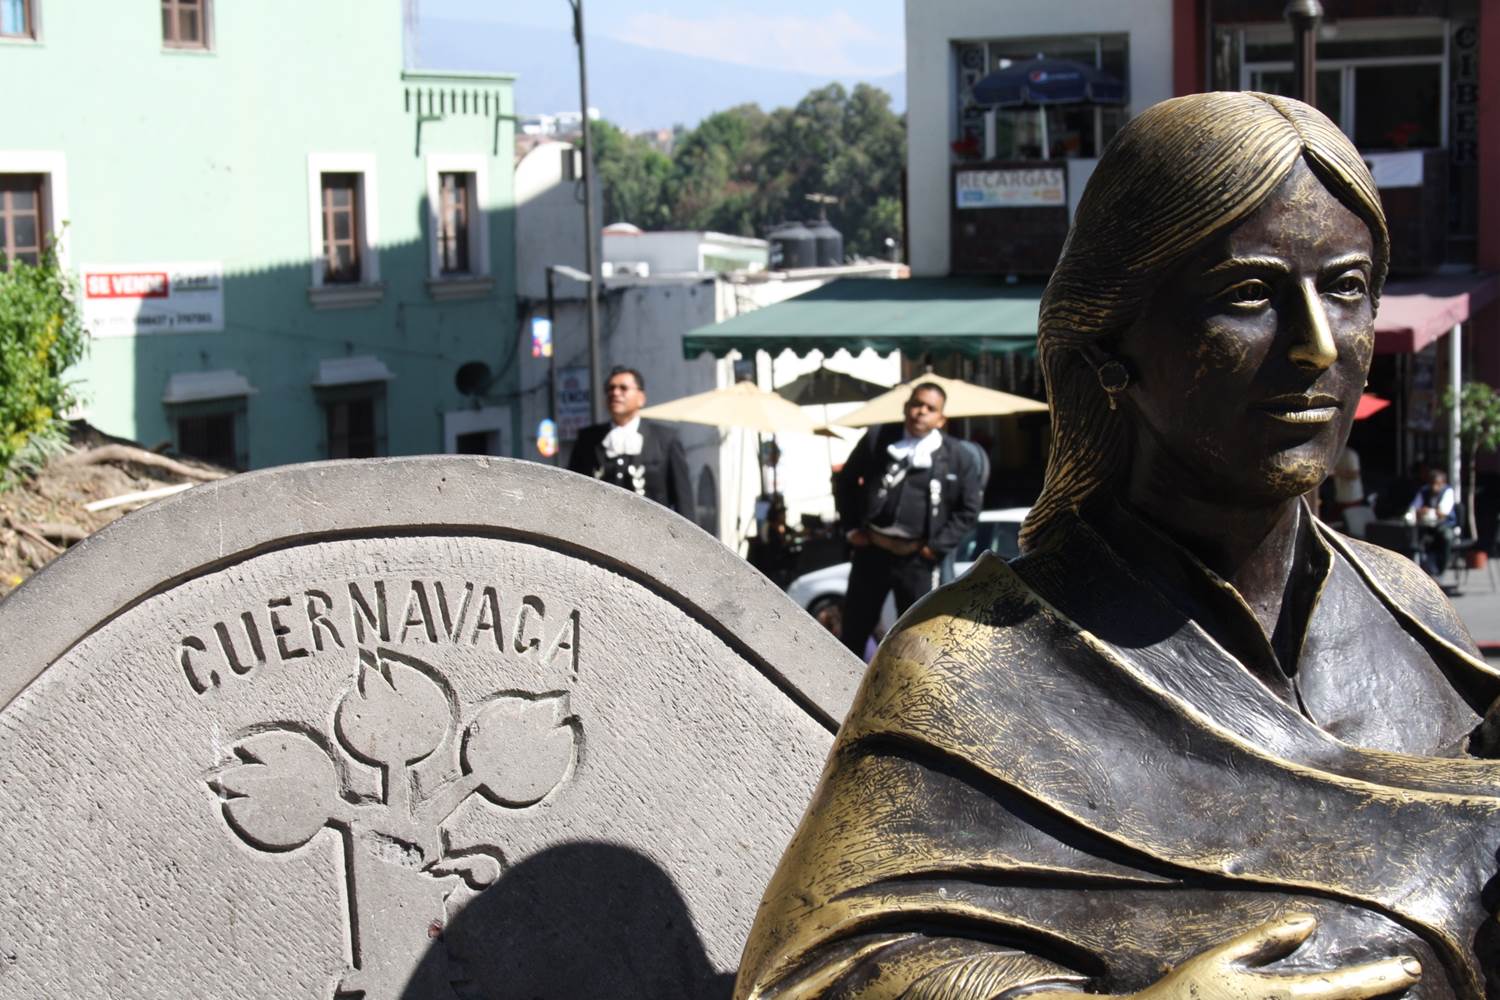 Welcome to Cuernavaca - the City of Eternal Spring